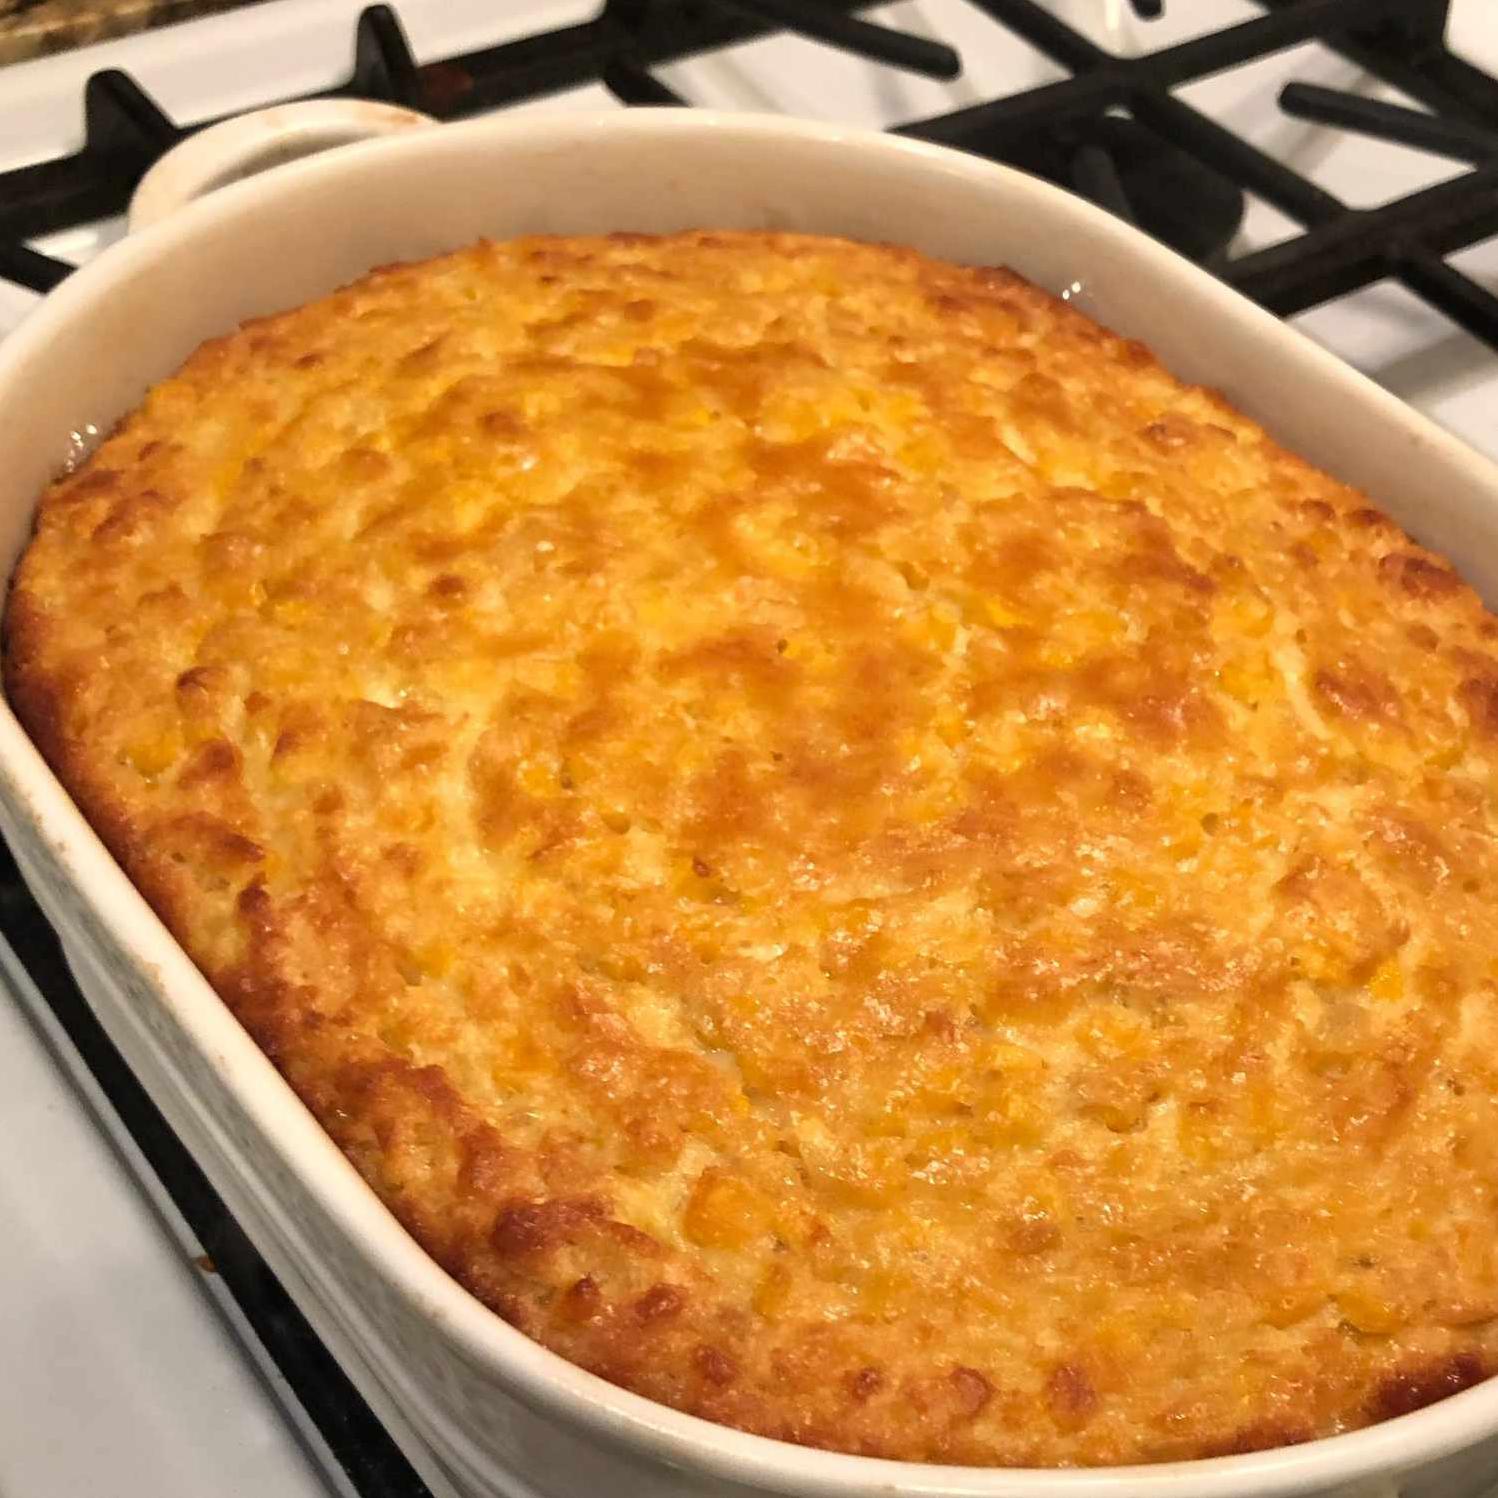  Who needs eggs when you have delicious and creamy corn pudding?